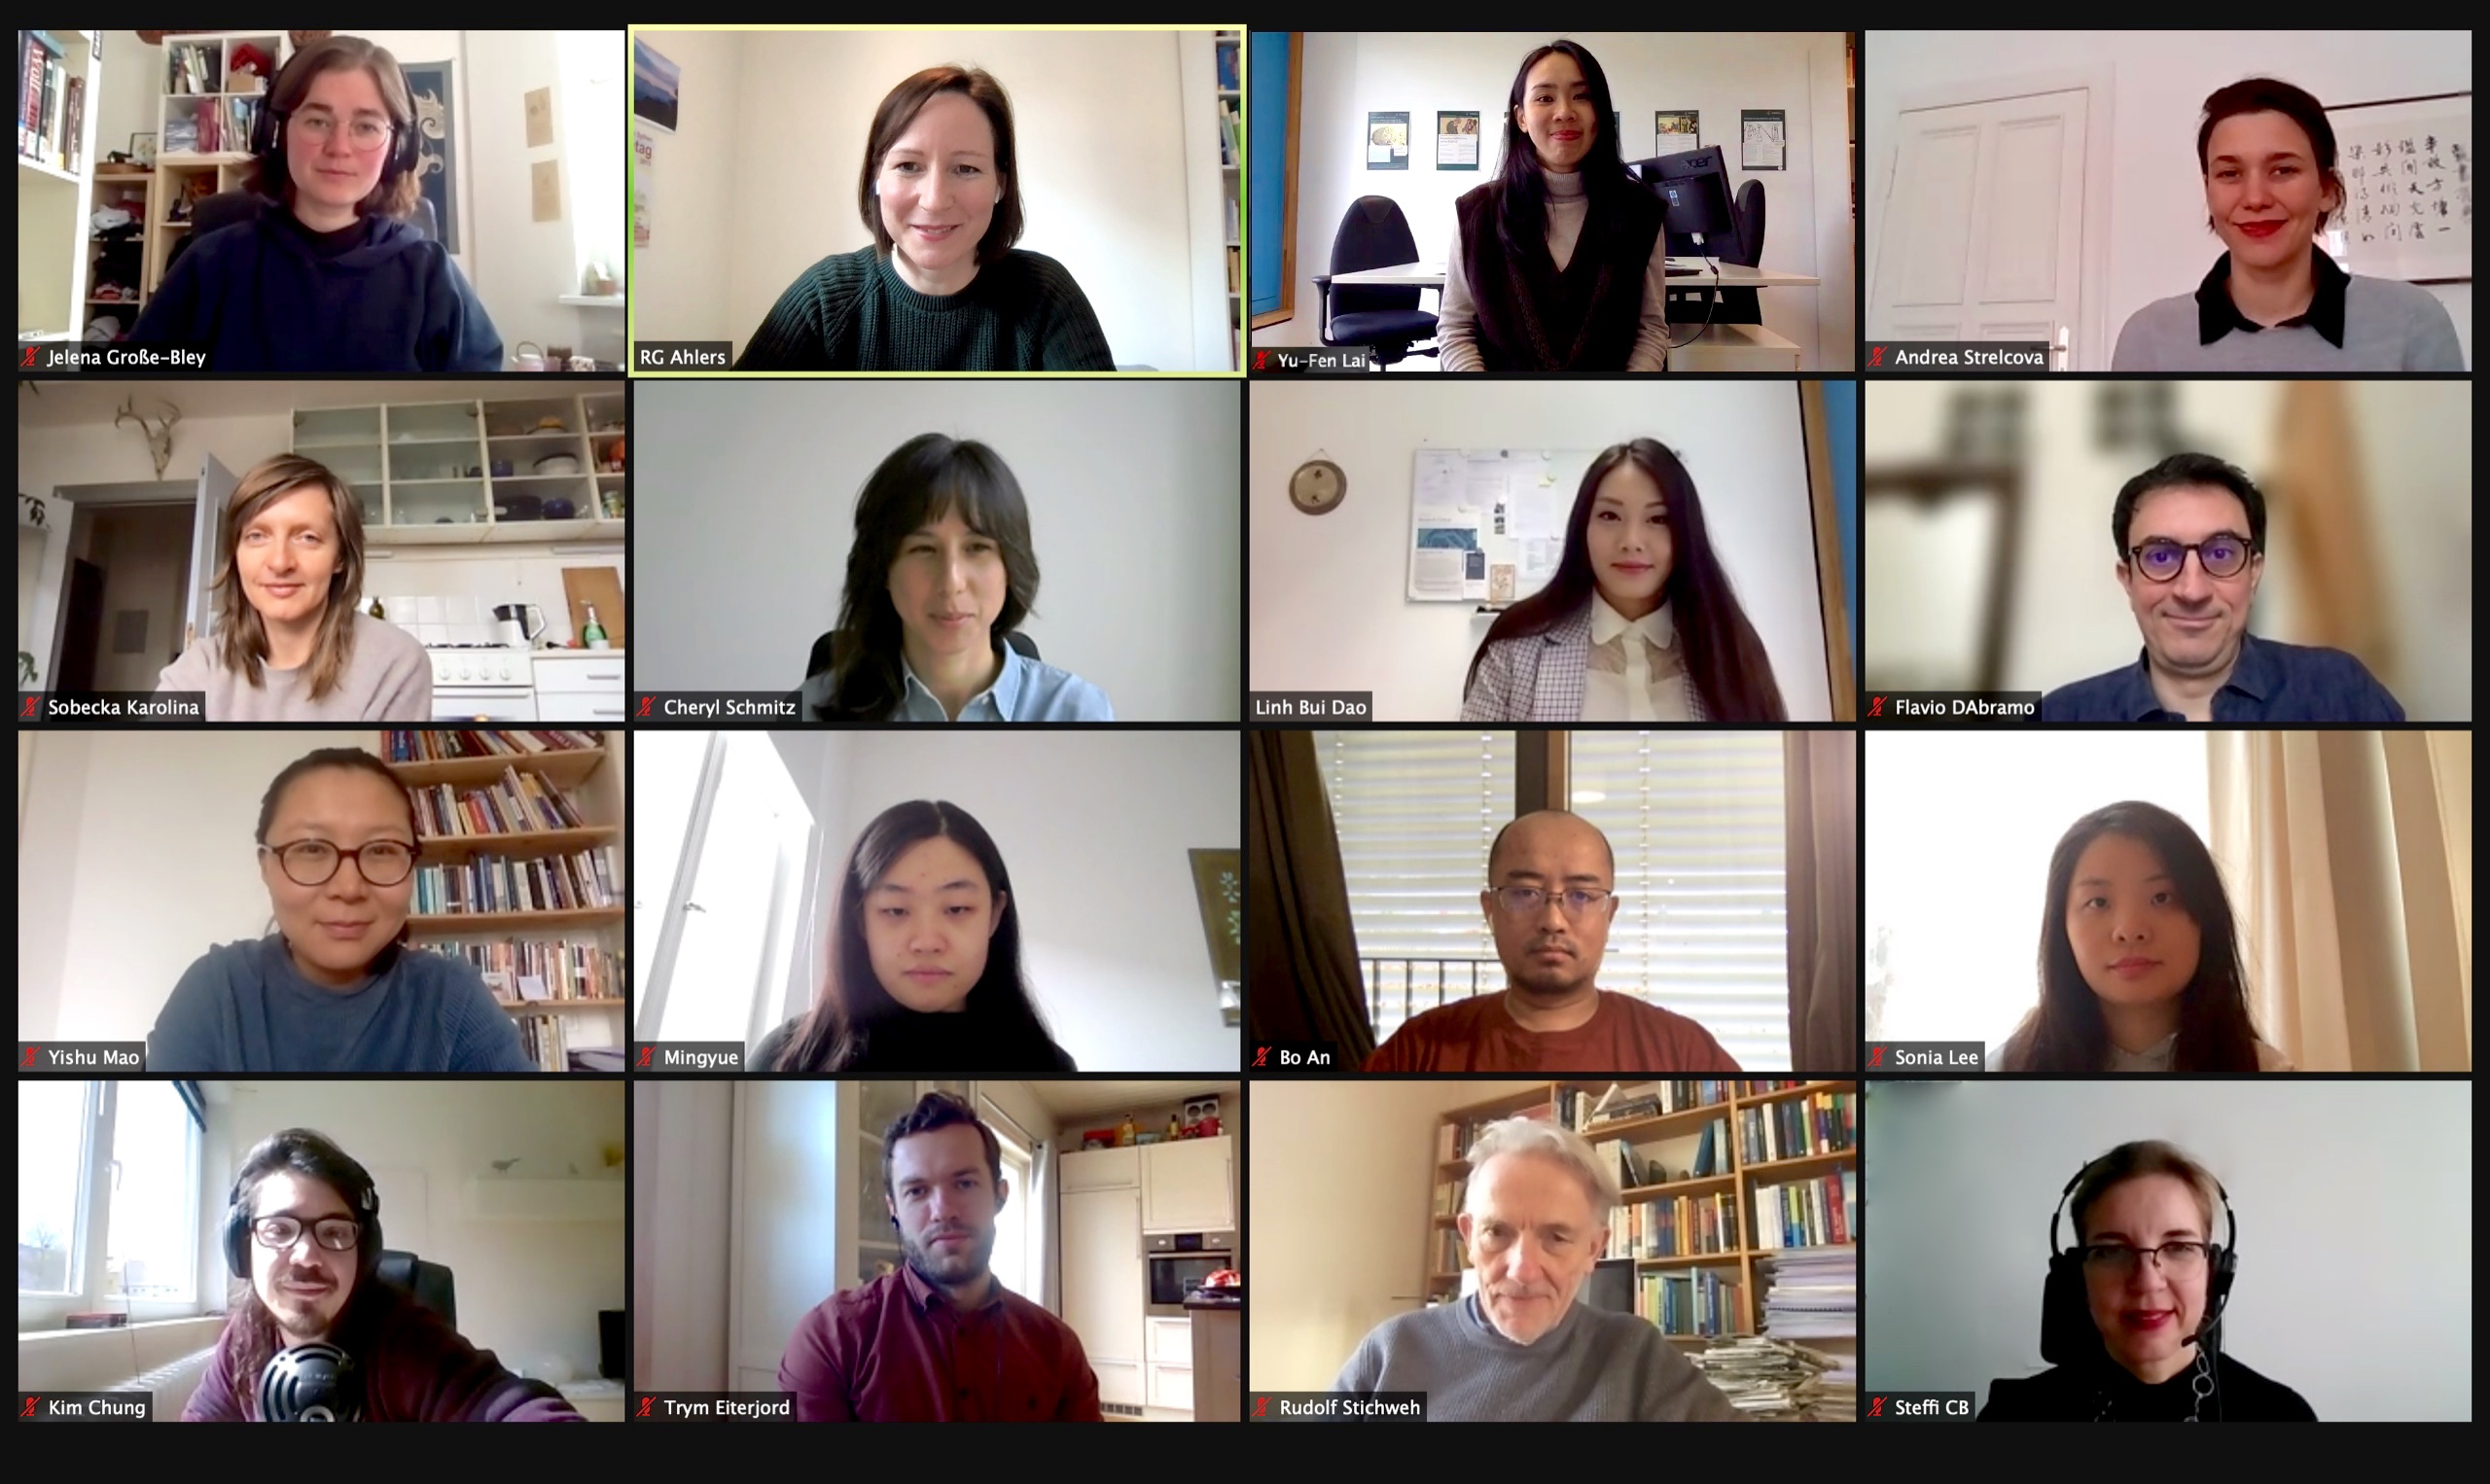 Members of the LMRG "China in the Global System of Science"